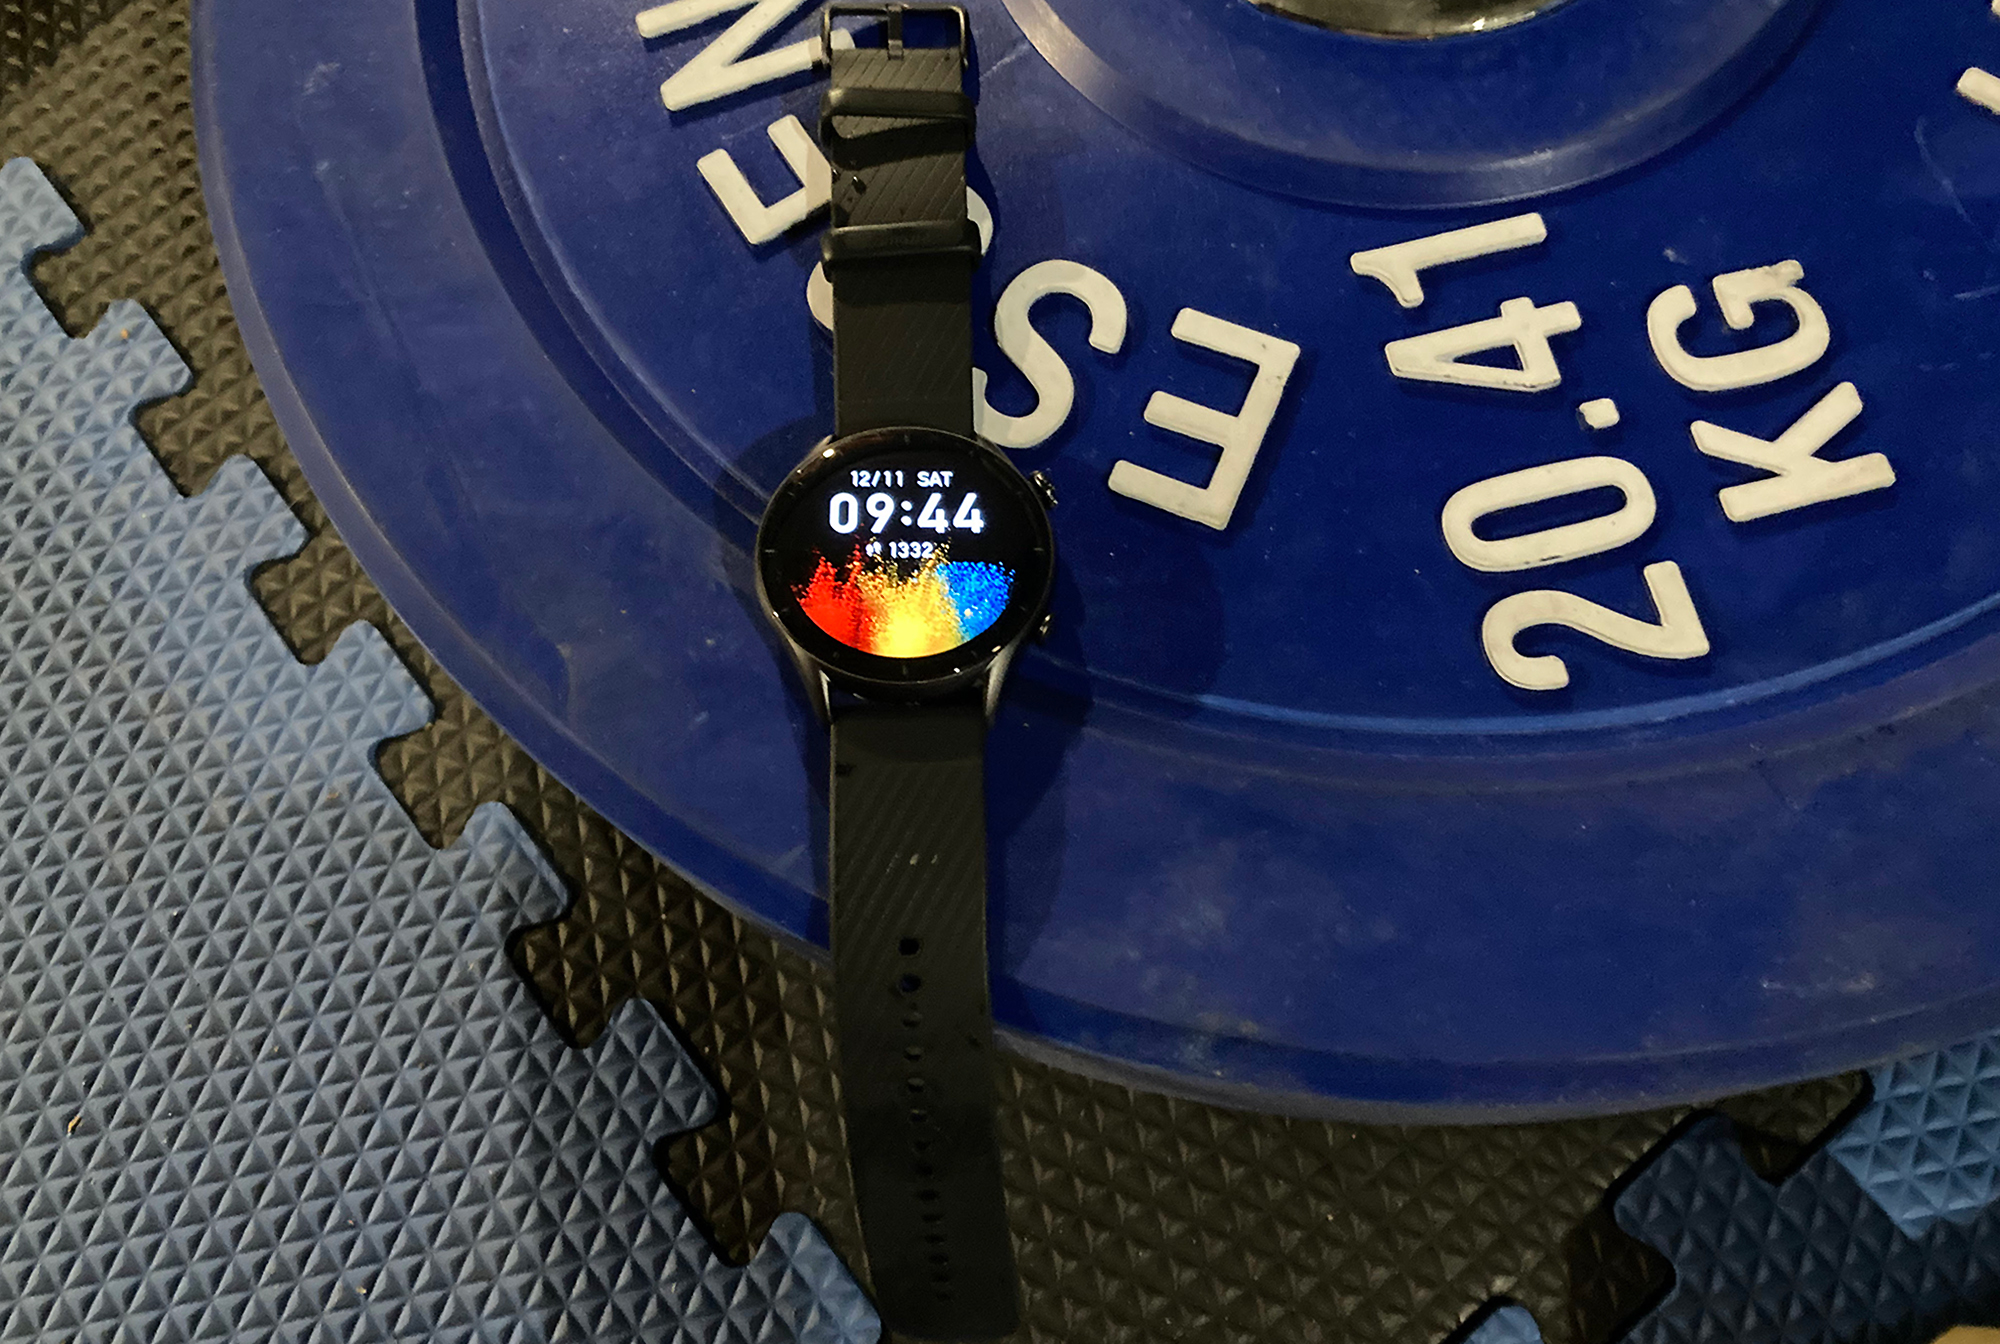 Amazfit GTR 3 review: The right balance between looks and